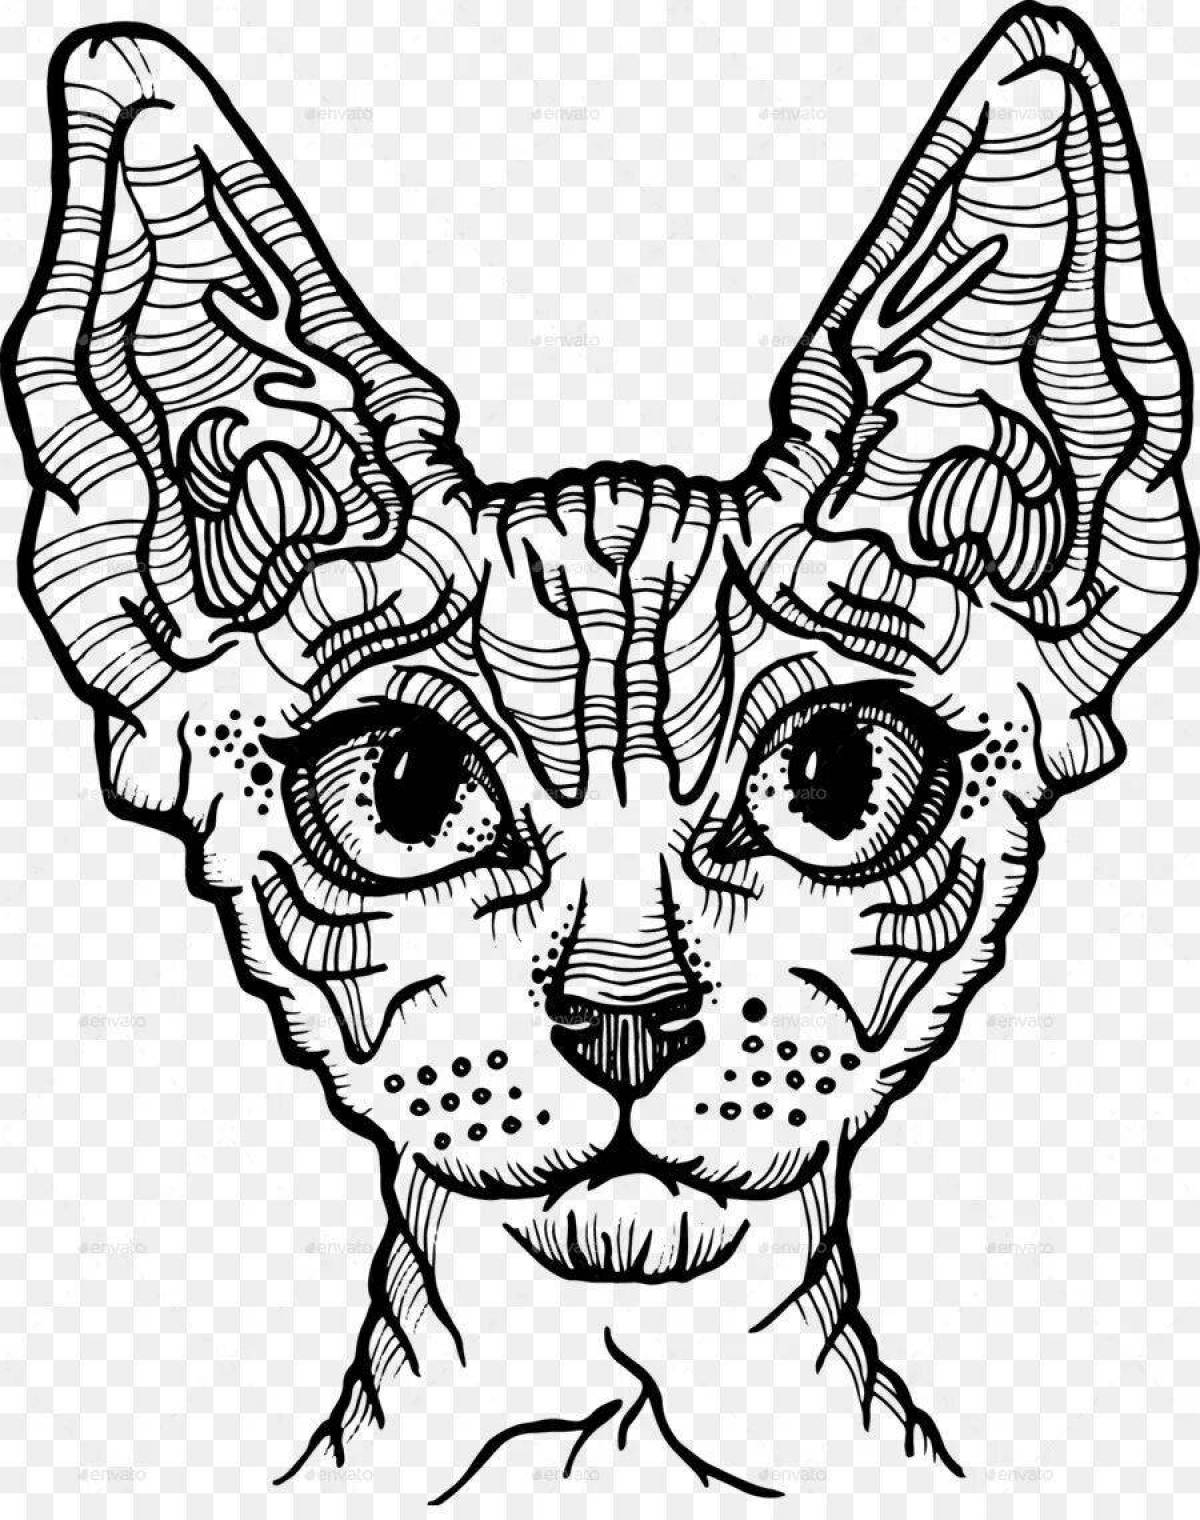 Coloring page striking sphinx cat